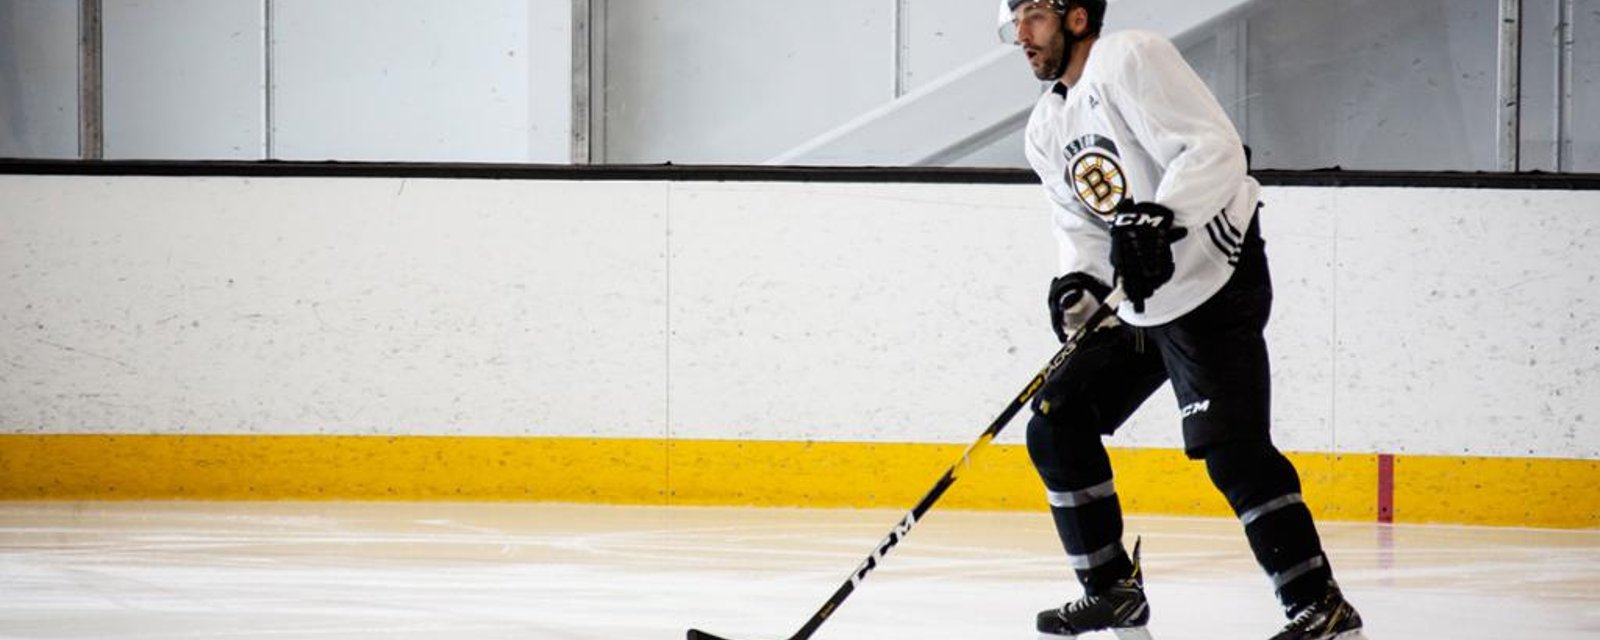 More uncertainty added to Patrice Bergeron’s situation ahead of Game 5